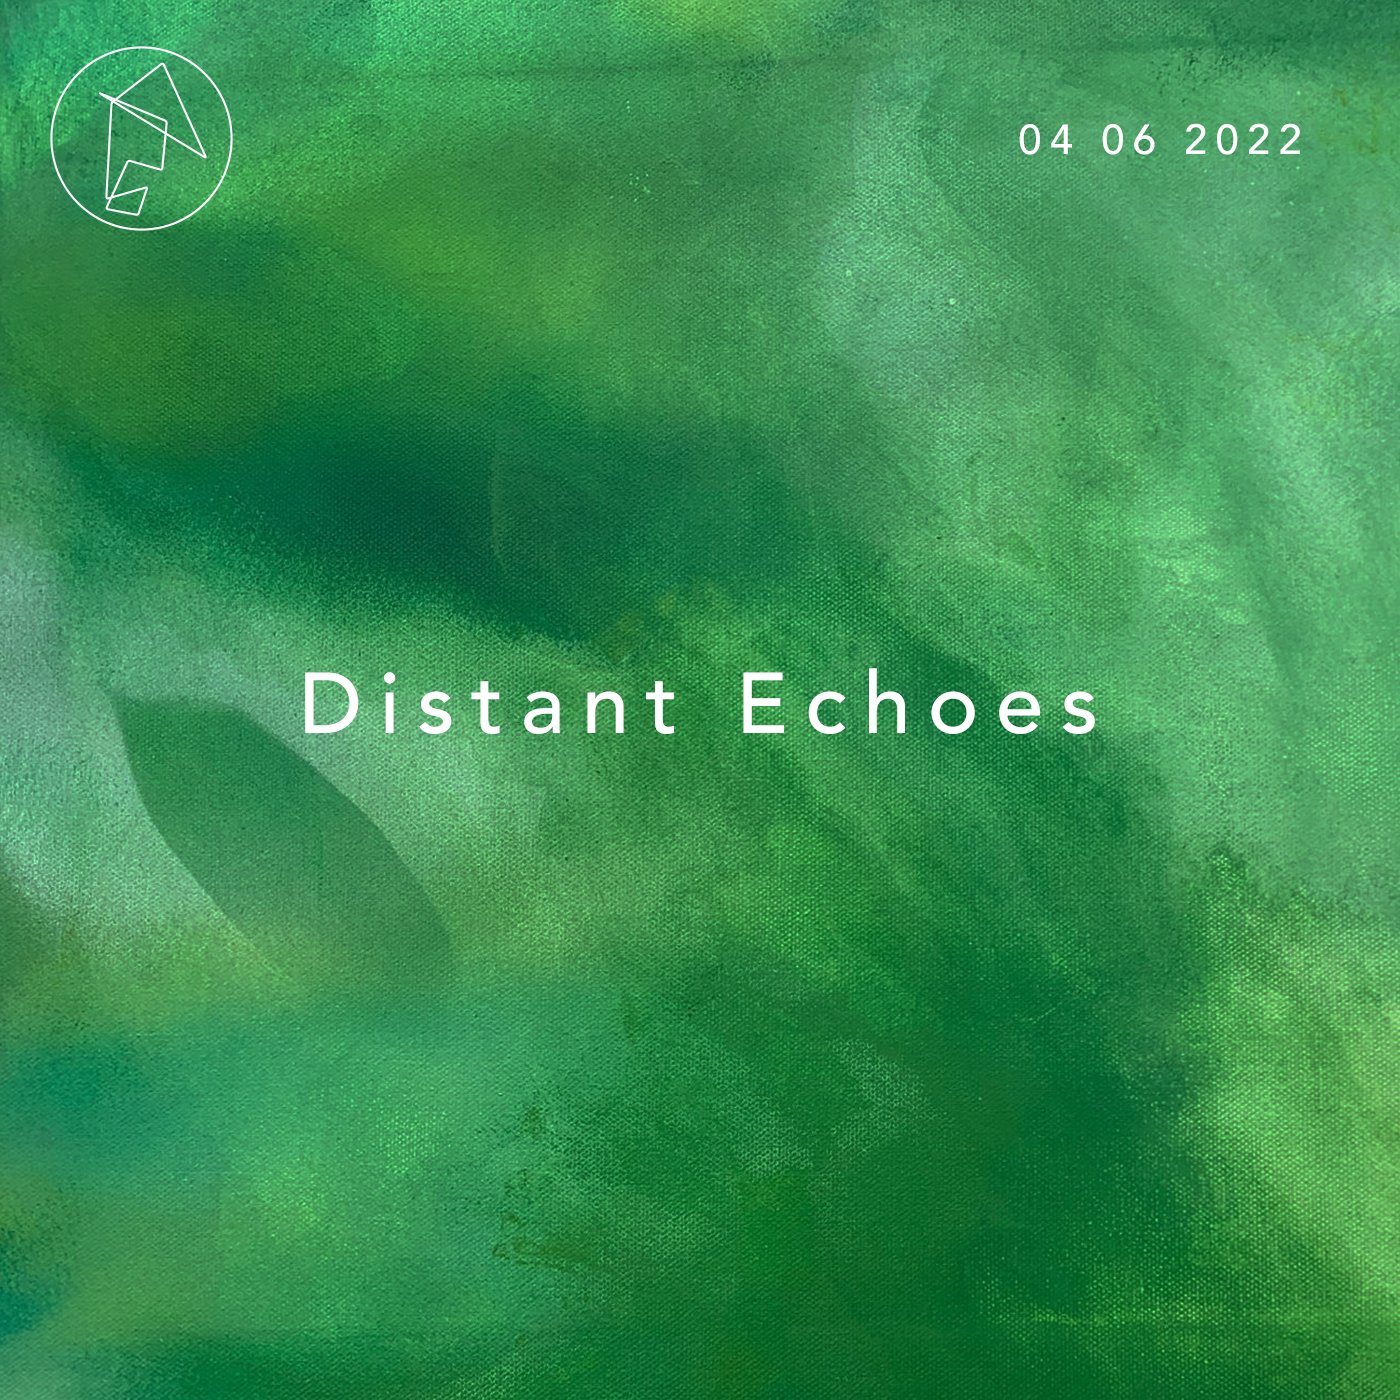 Distant Echoes.jpg